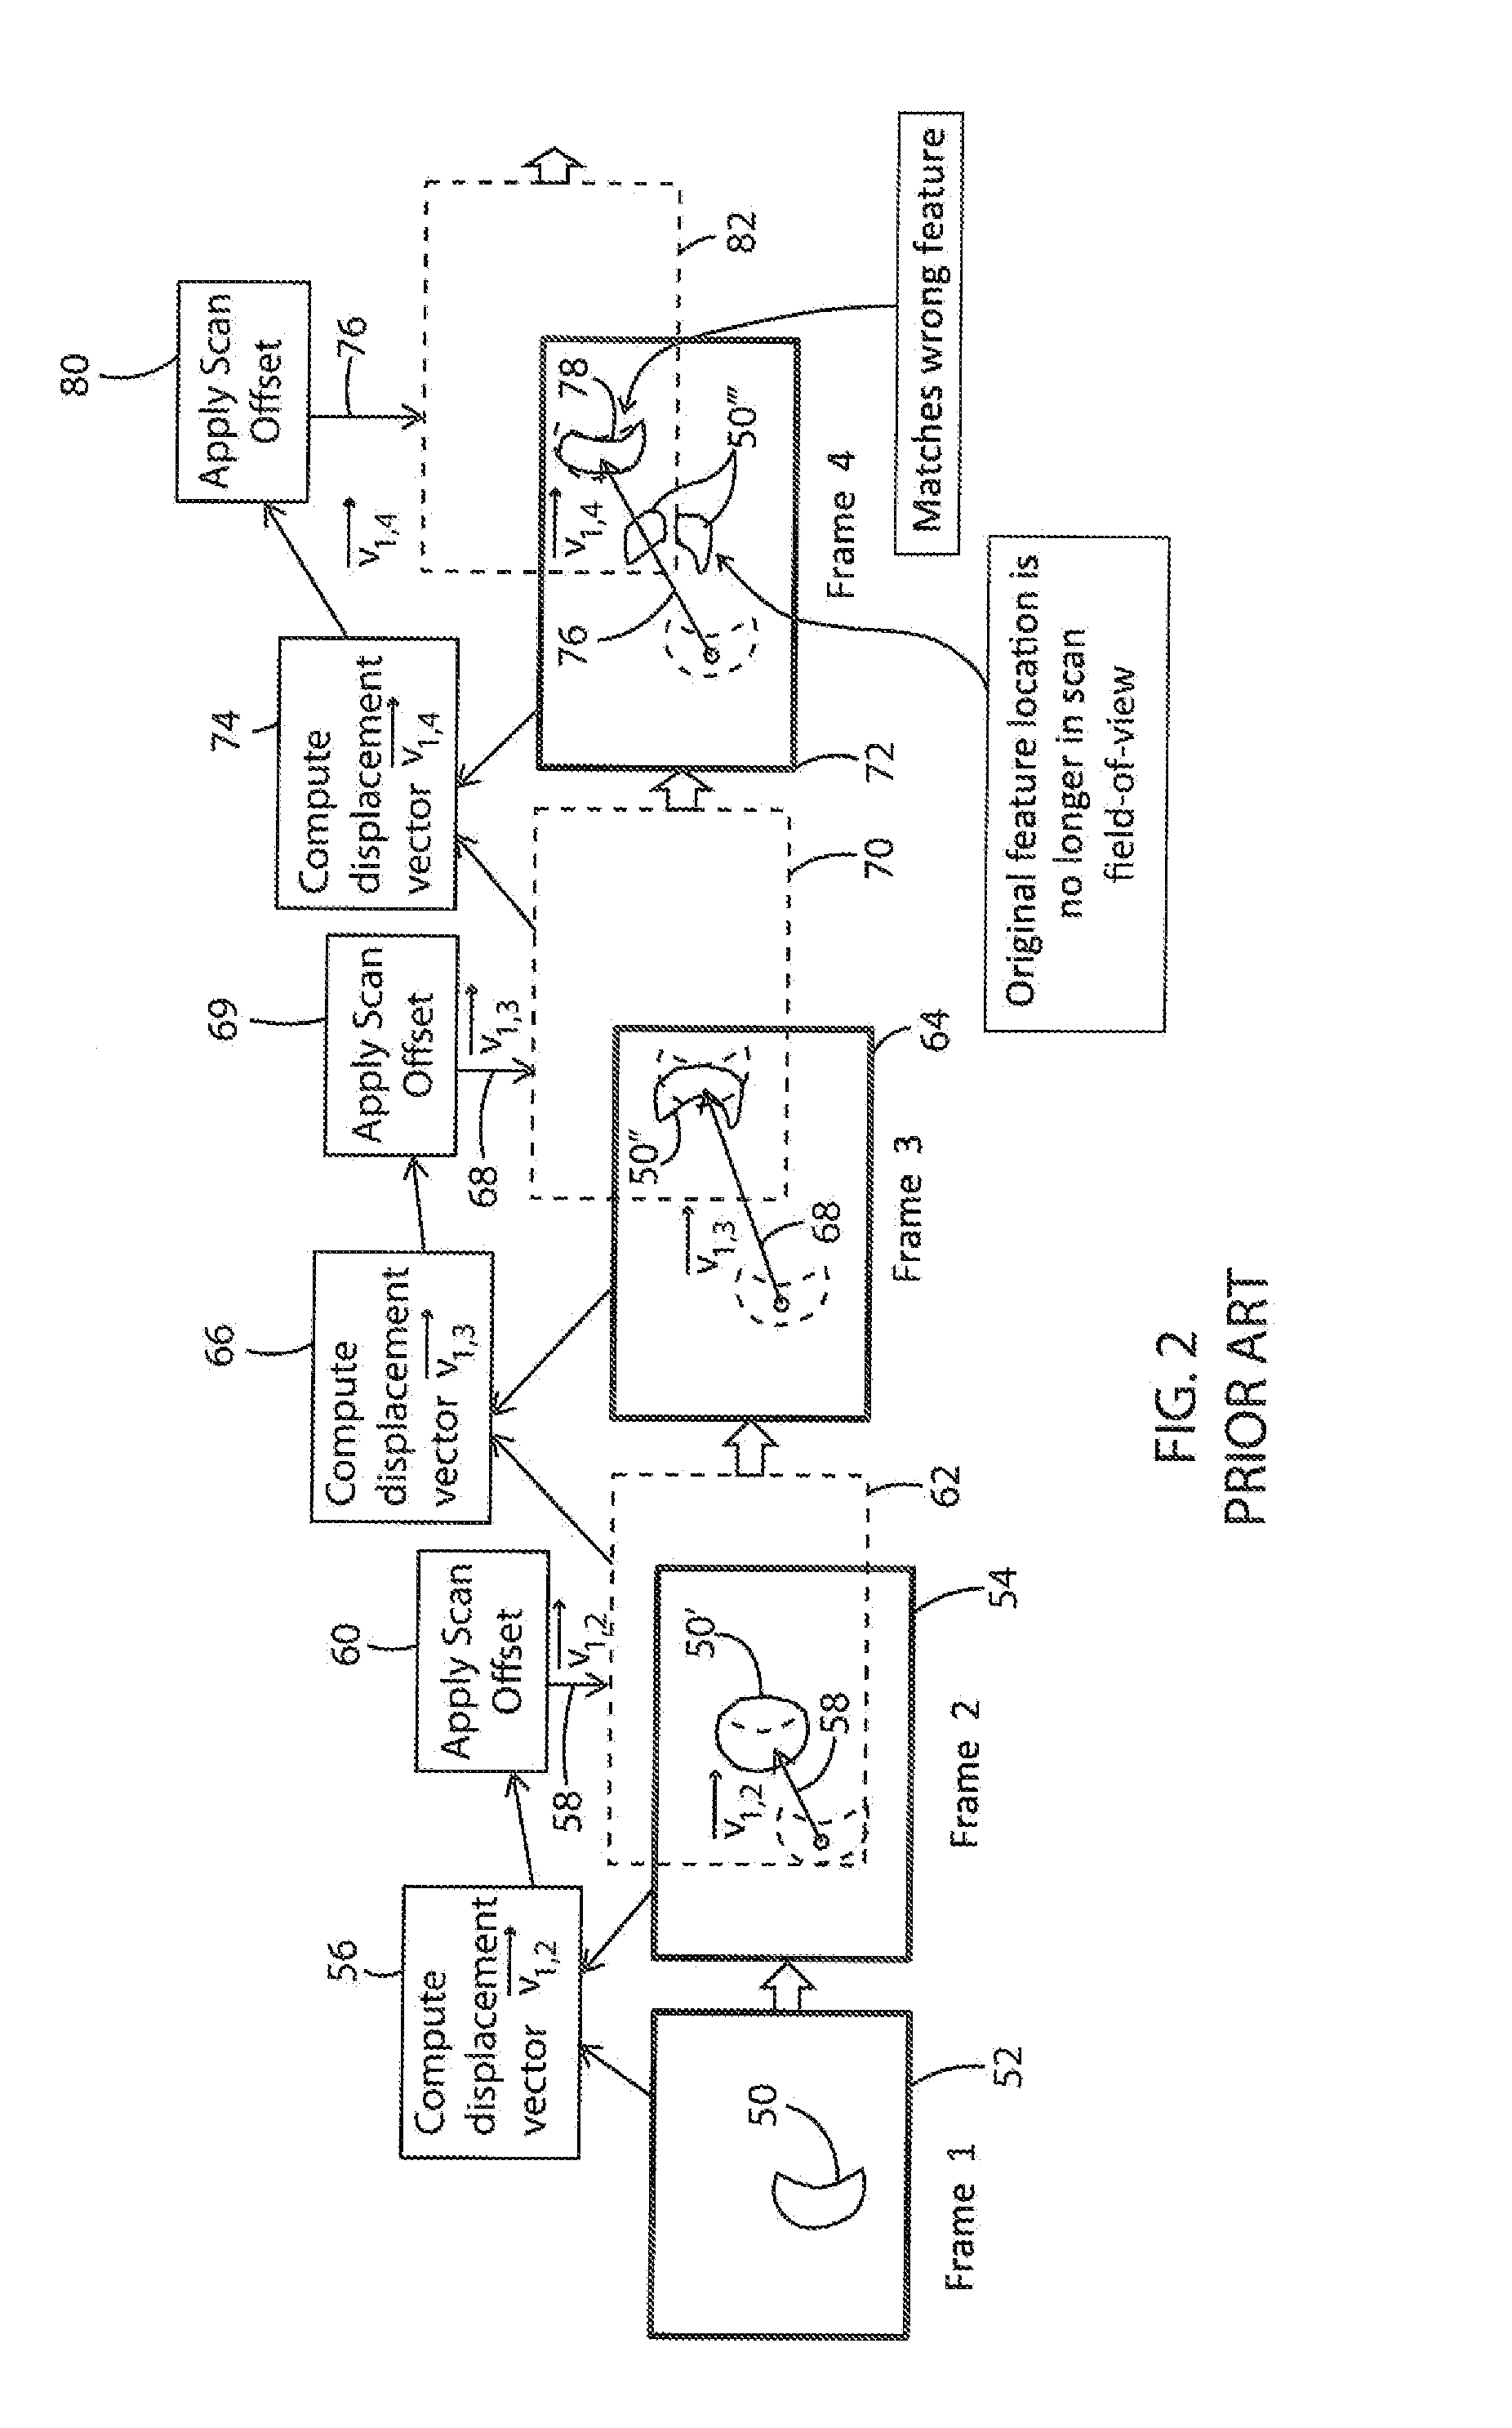 Method and apparatus for adaptive tracking using a scanning probe microscope